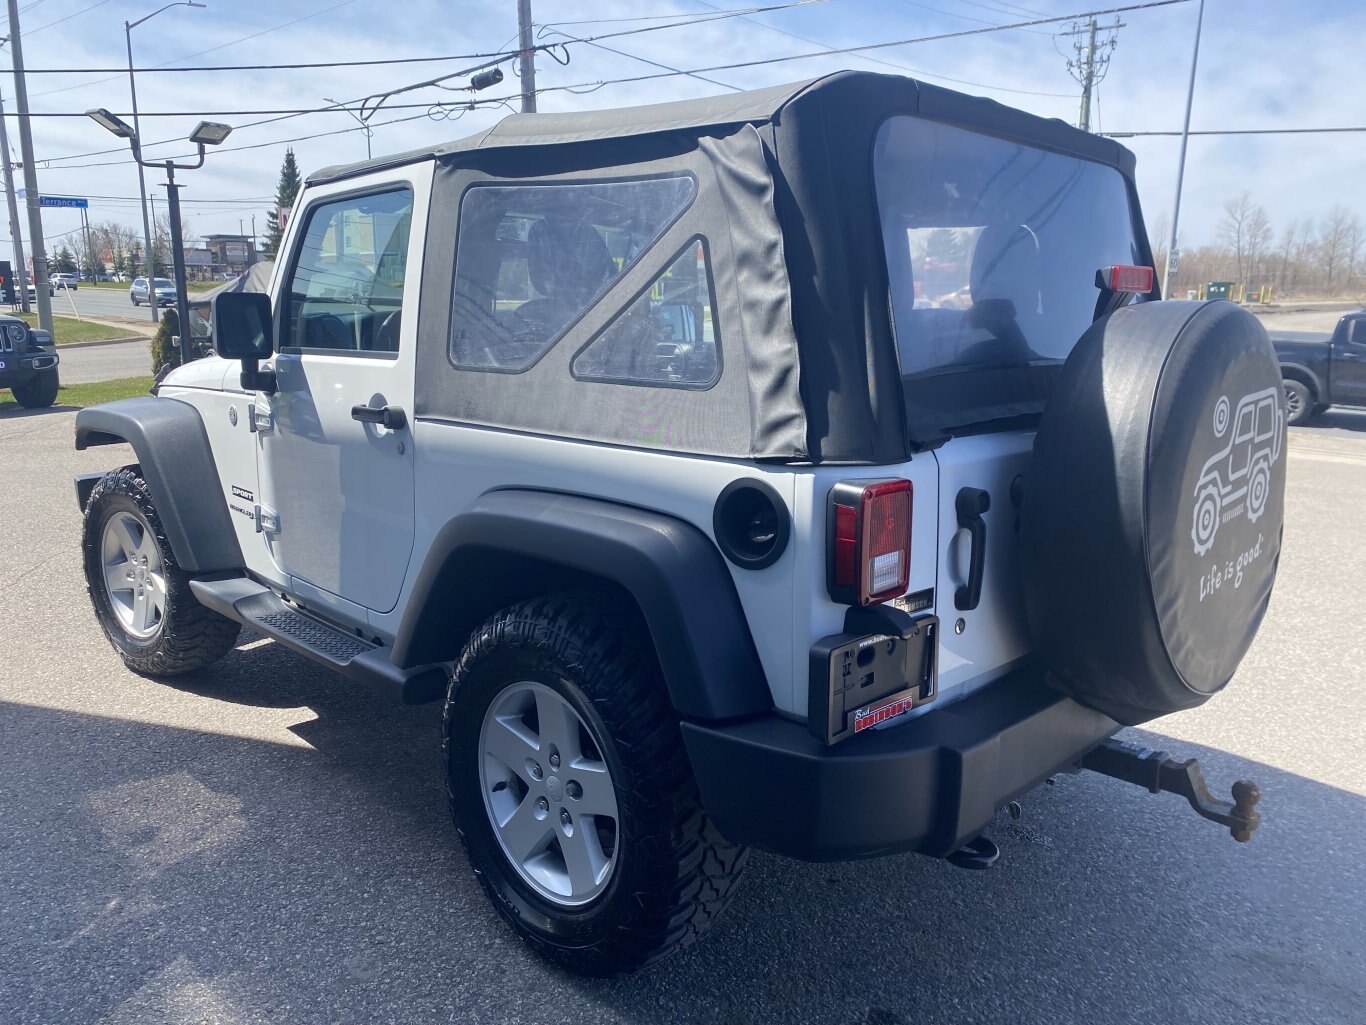 2018 JEEP WRANGLER JK SPORT 2dr 4x4 ( HAS SOFT TOP ONLY )